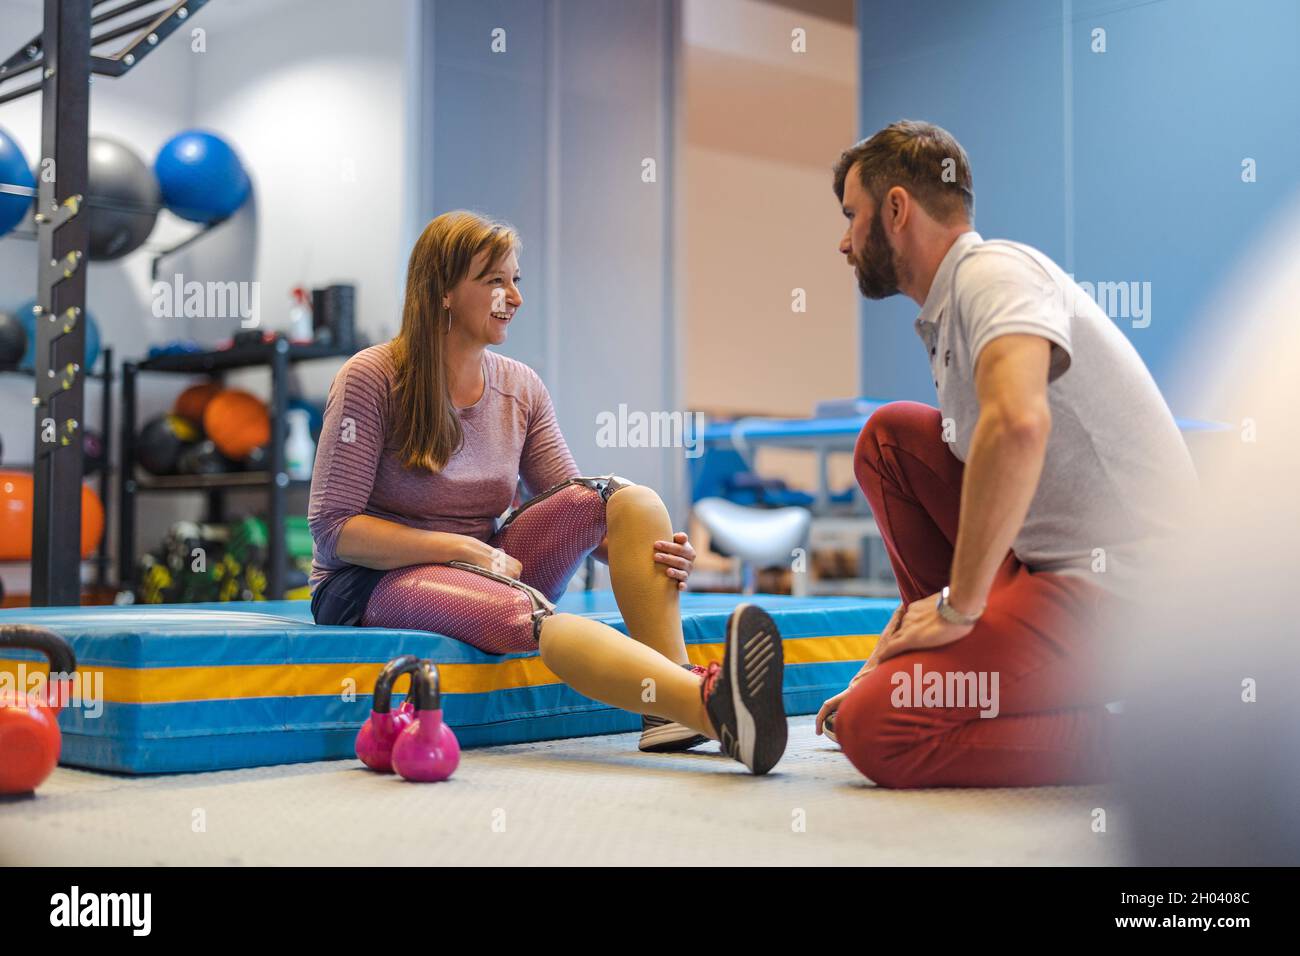 Physiotherapist helping young woman with prosthetic legs Stock Photo